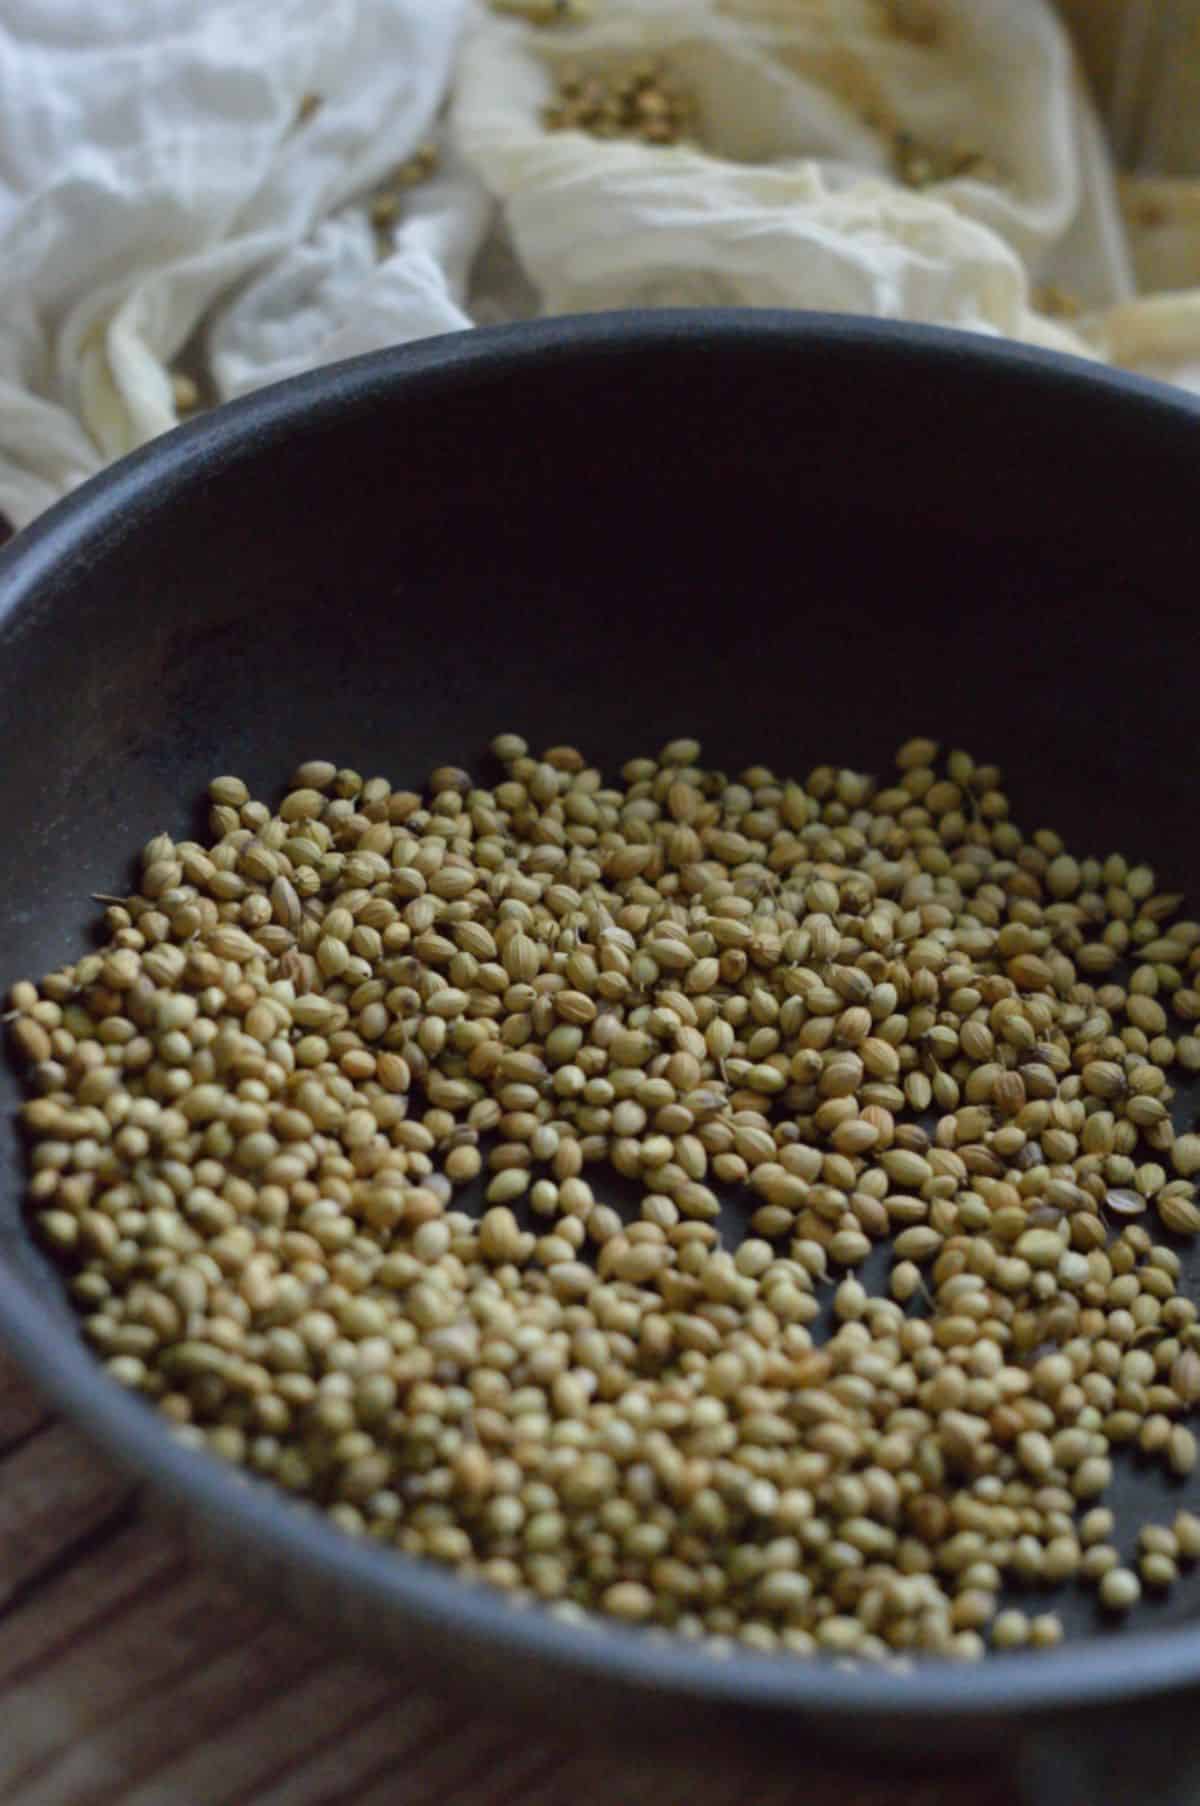 Dried coriander seeds in a black bowl.